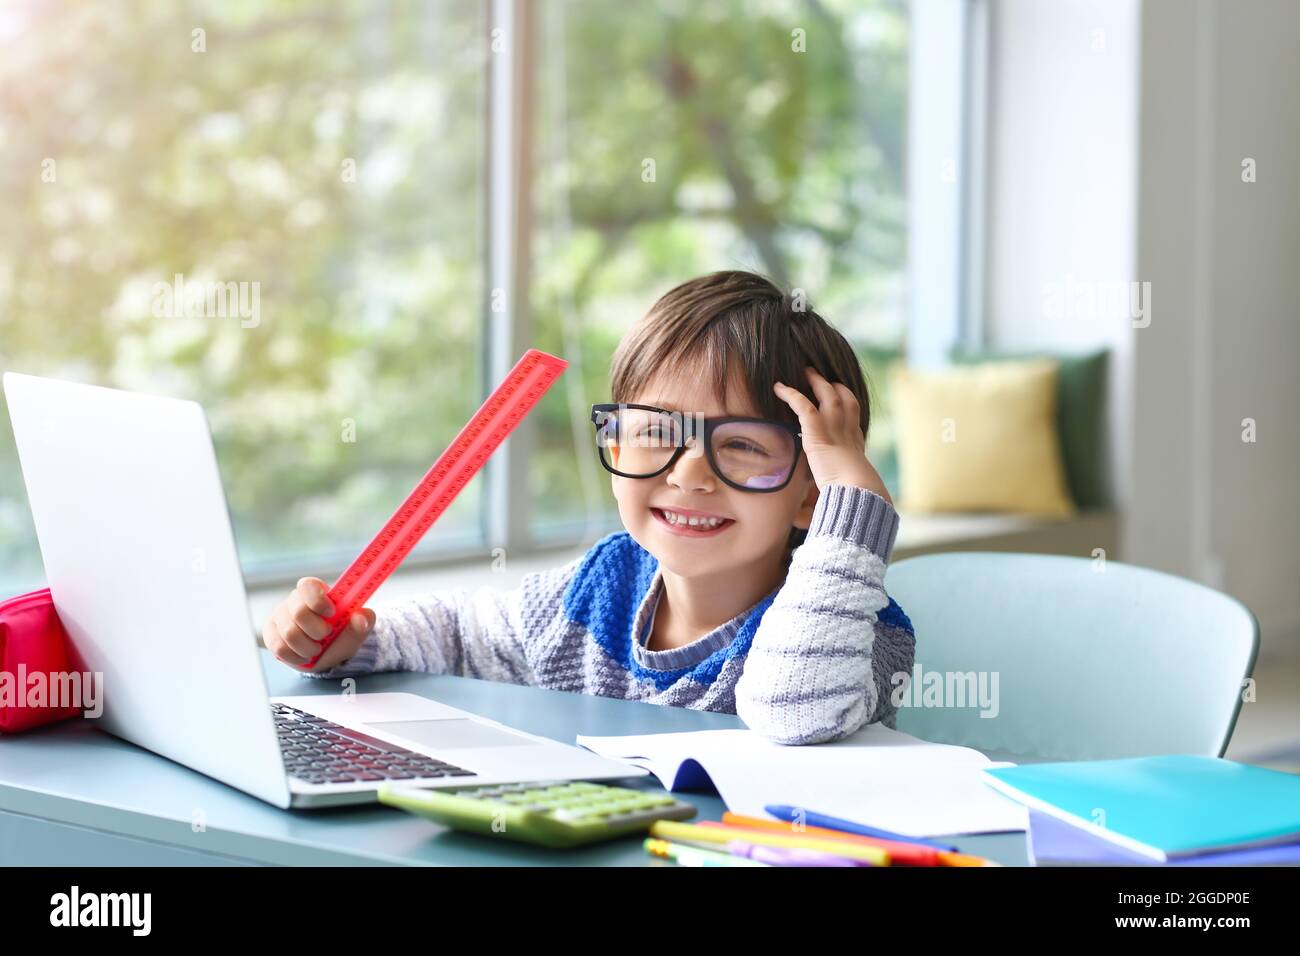 Little boy studying online at home Stock Photo